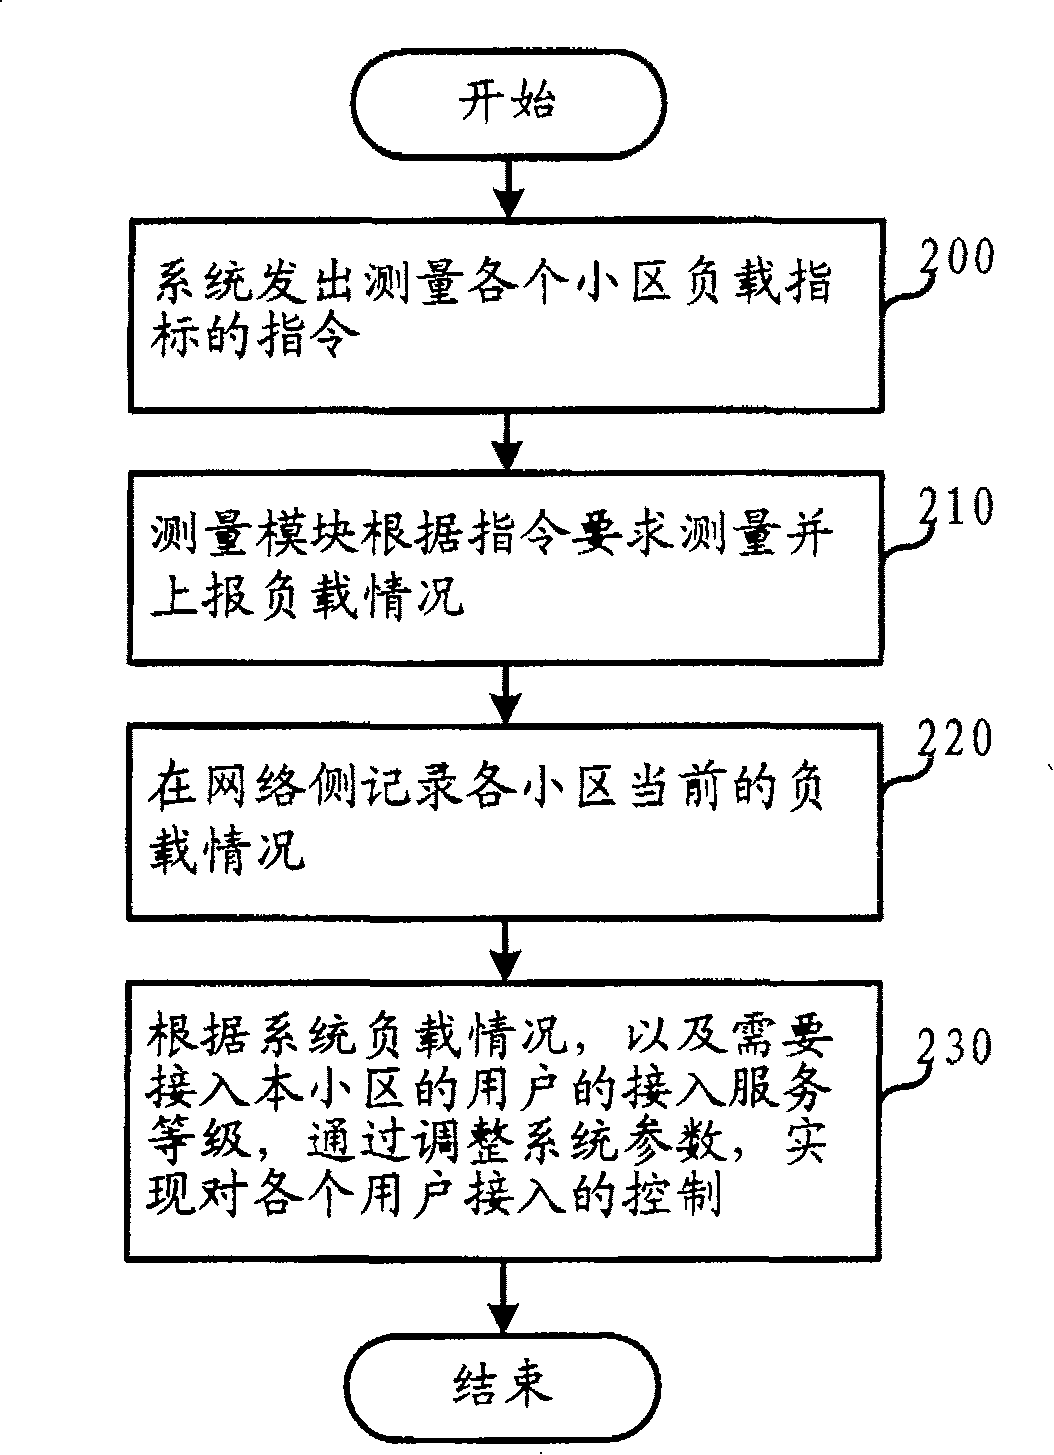 Access control method in mobile communication system